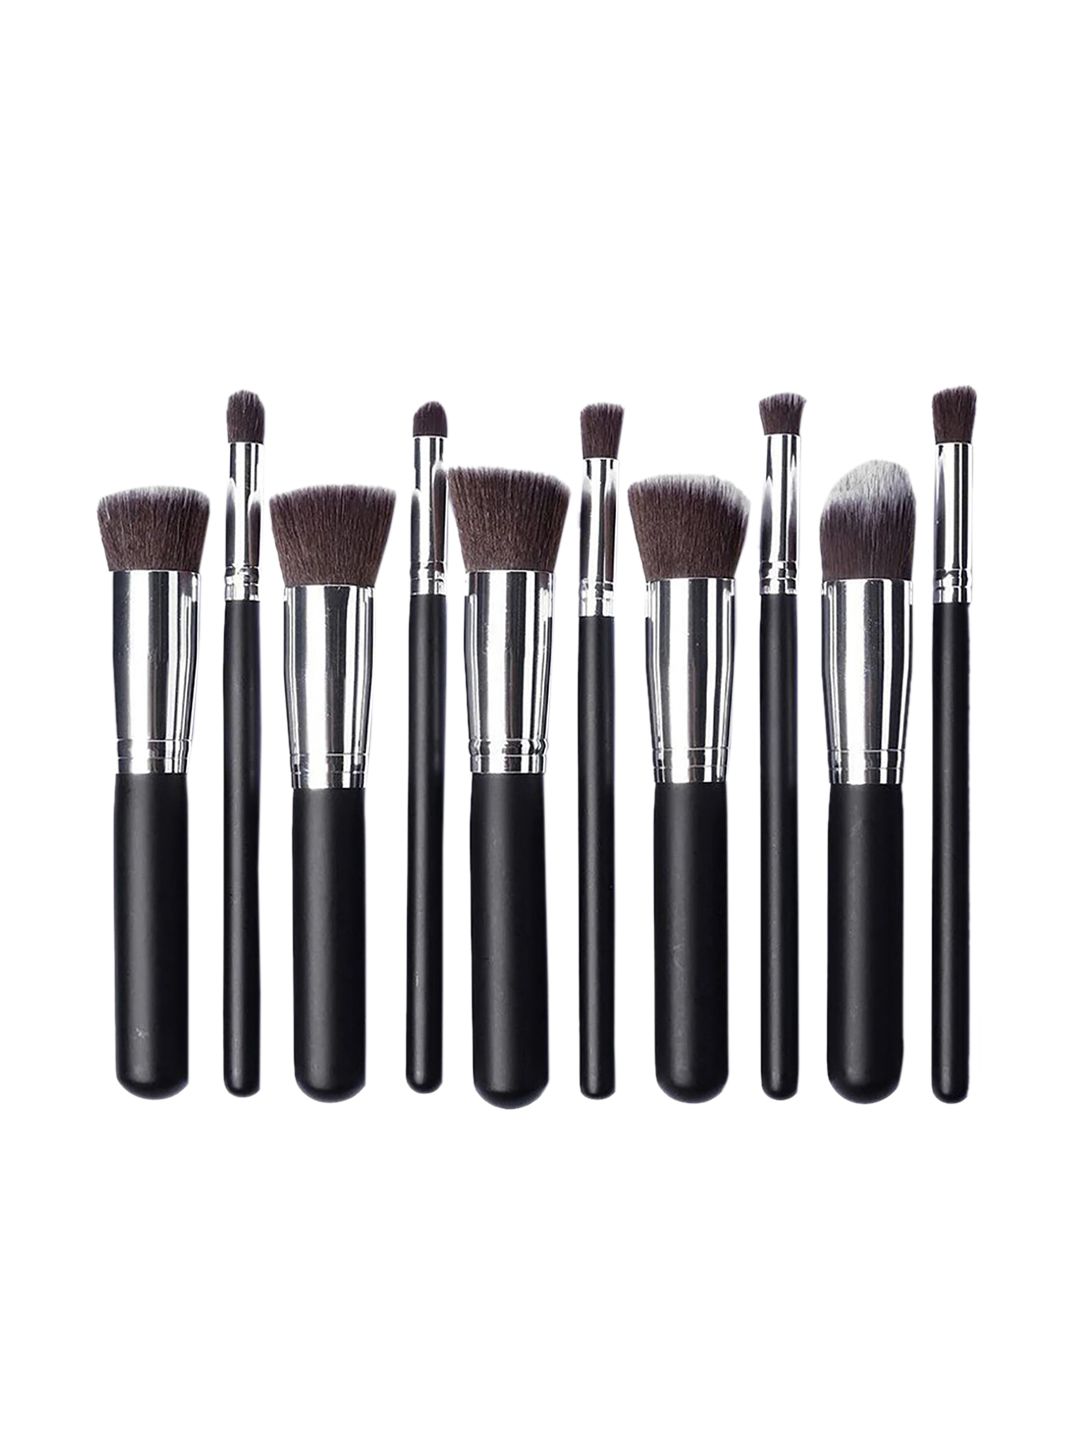 Ronzille Set of 10 Makeup Brushes - Black Price in India